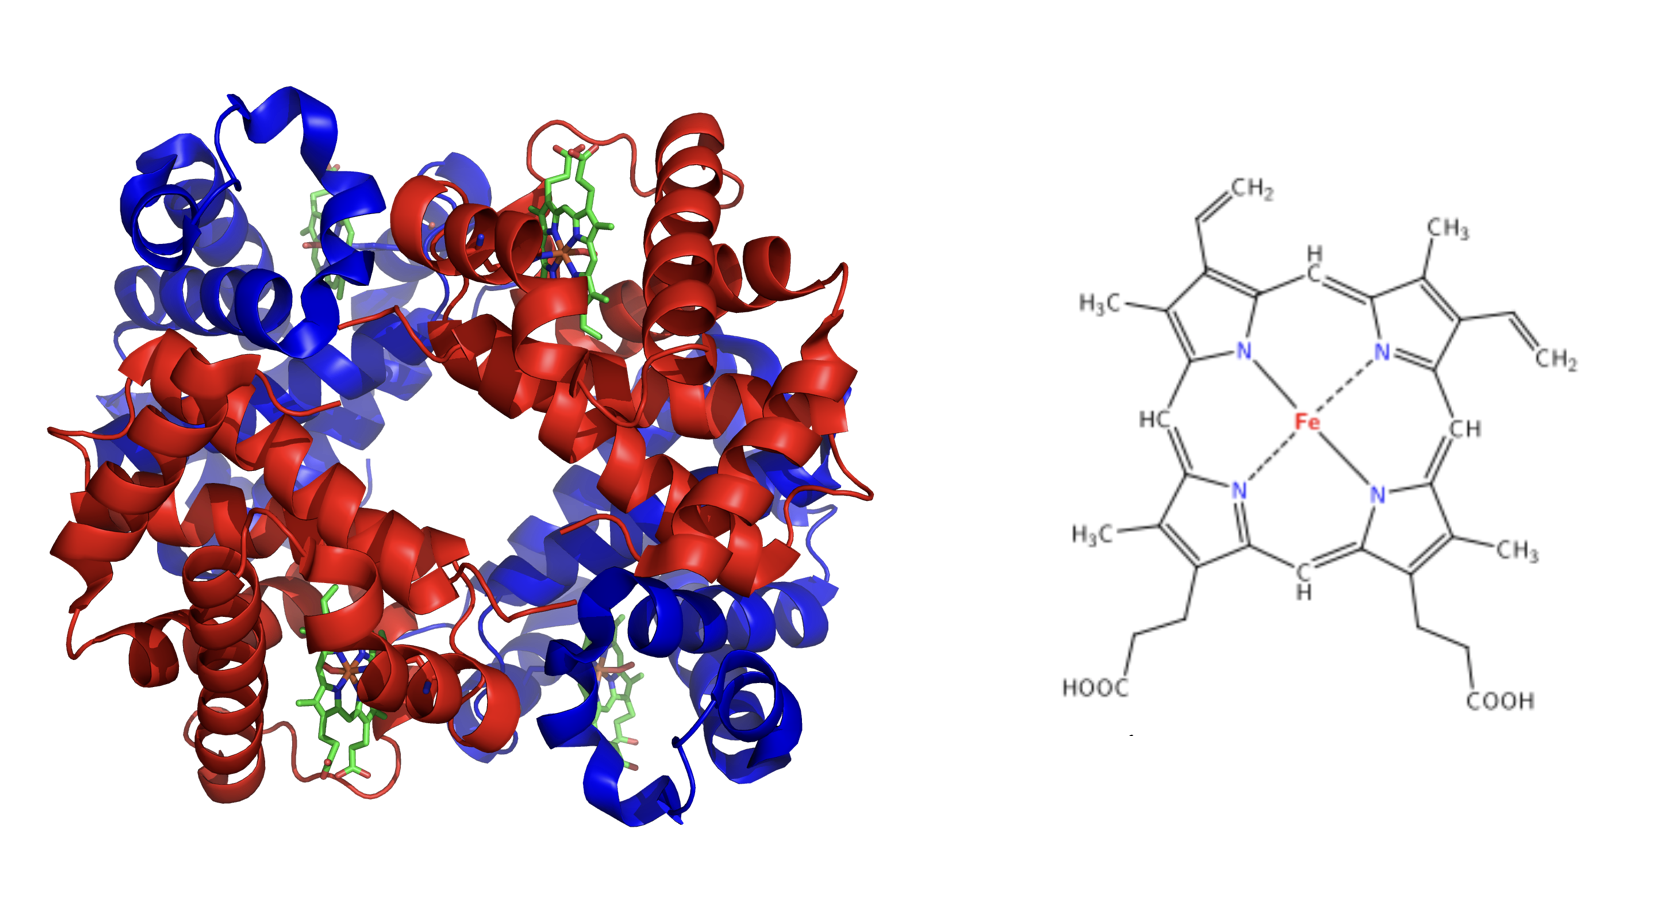 On the left the structure of hemoglobin includes four globular peptides (shown in blue and red), that come together to form the protein hemoglobin. Each of these peptides has an iron-containing heme molecule in the middle (shown in green). On the right is a closer look of the heme complex which is composed of a ringlike organic compound to which an iron atom is attached in the middle.